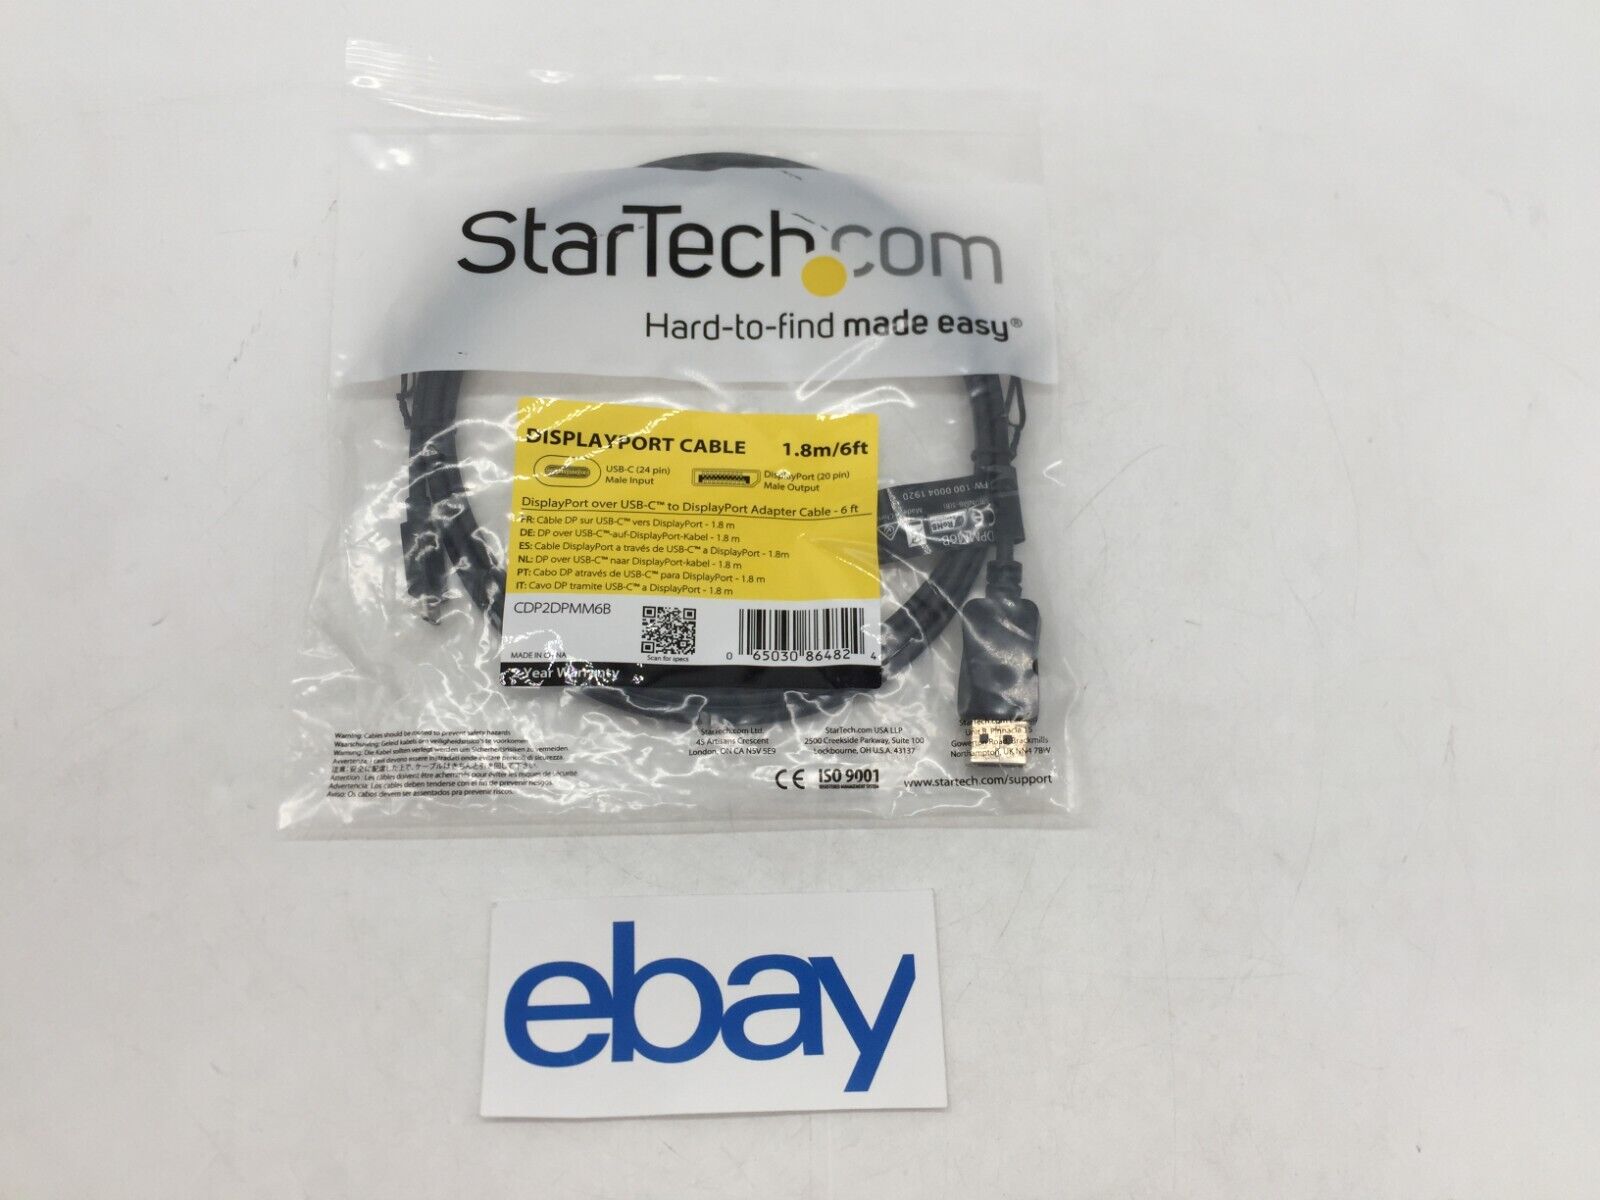 NEW STARTECH USB-C to DisplayPort Cable Adapter 6FT FREE S/H